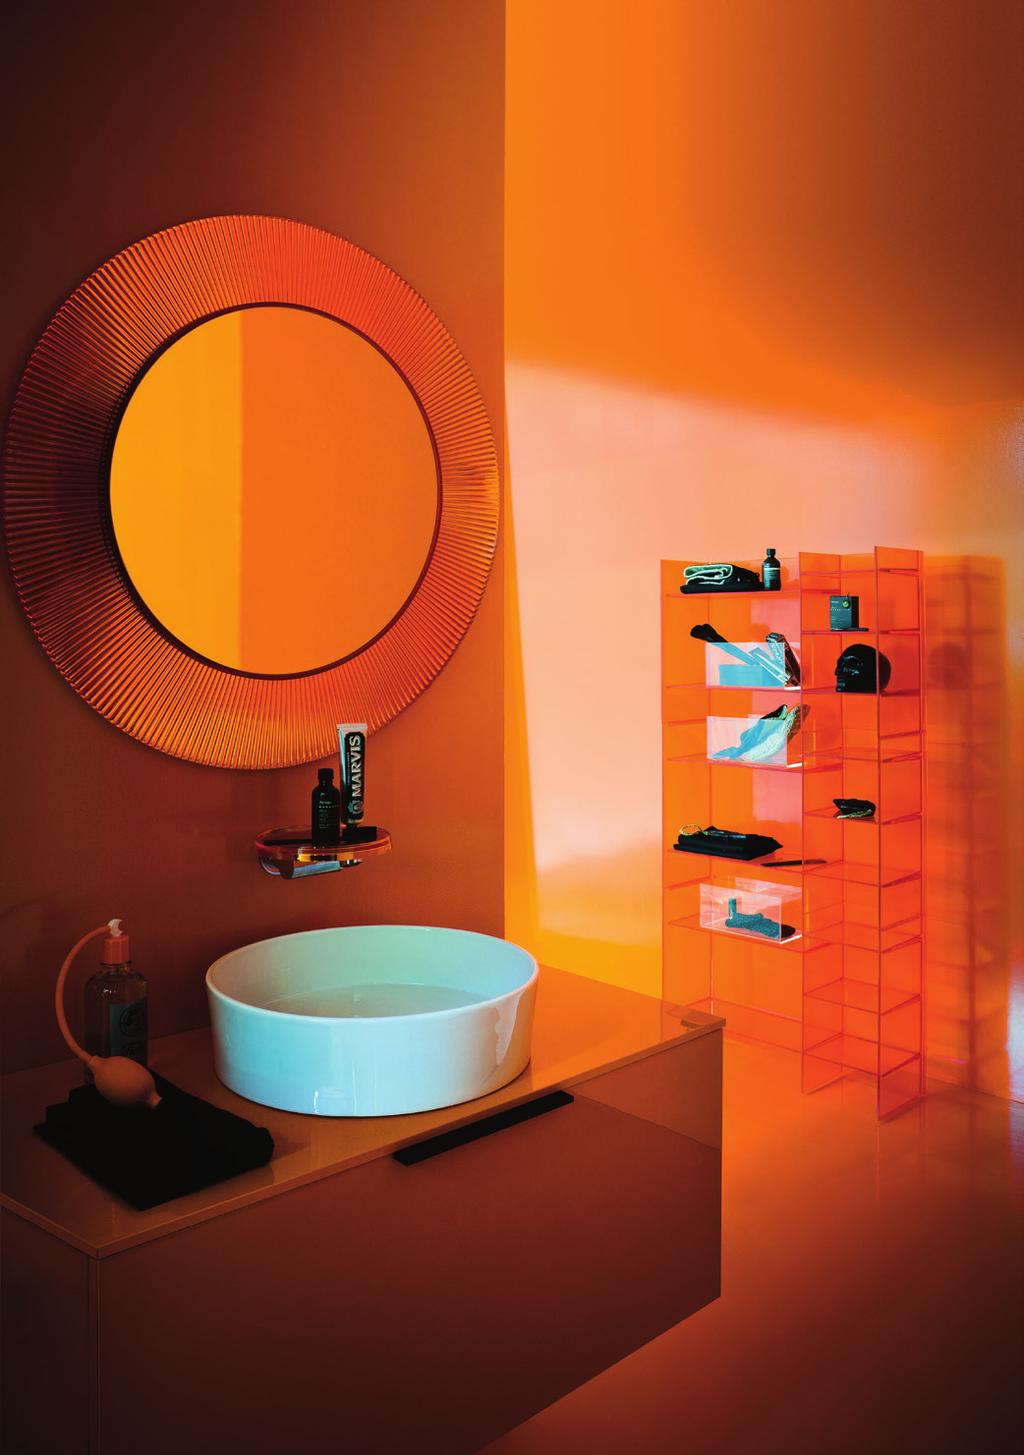 Washbasin bowl 42 Drawer element 900 Wall-mounted mixer disc tangerine orange Rack 'Sound-rack' tangerine orange Mirror 'All Saints' tangerine orange Orange touch Then there's the